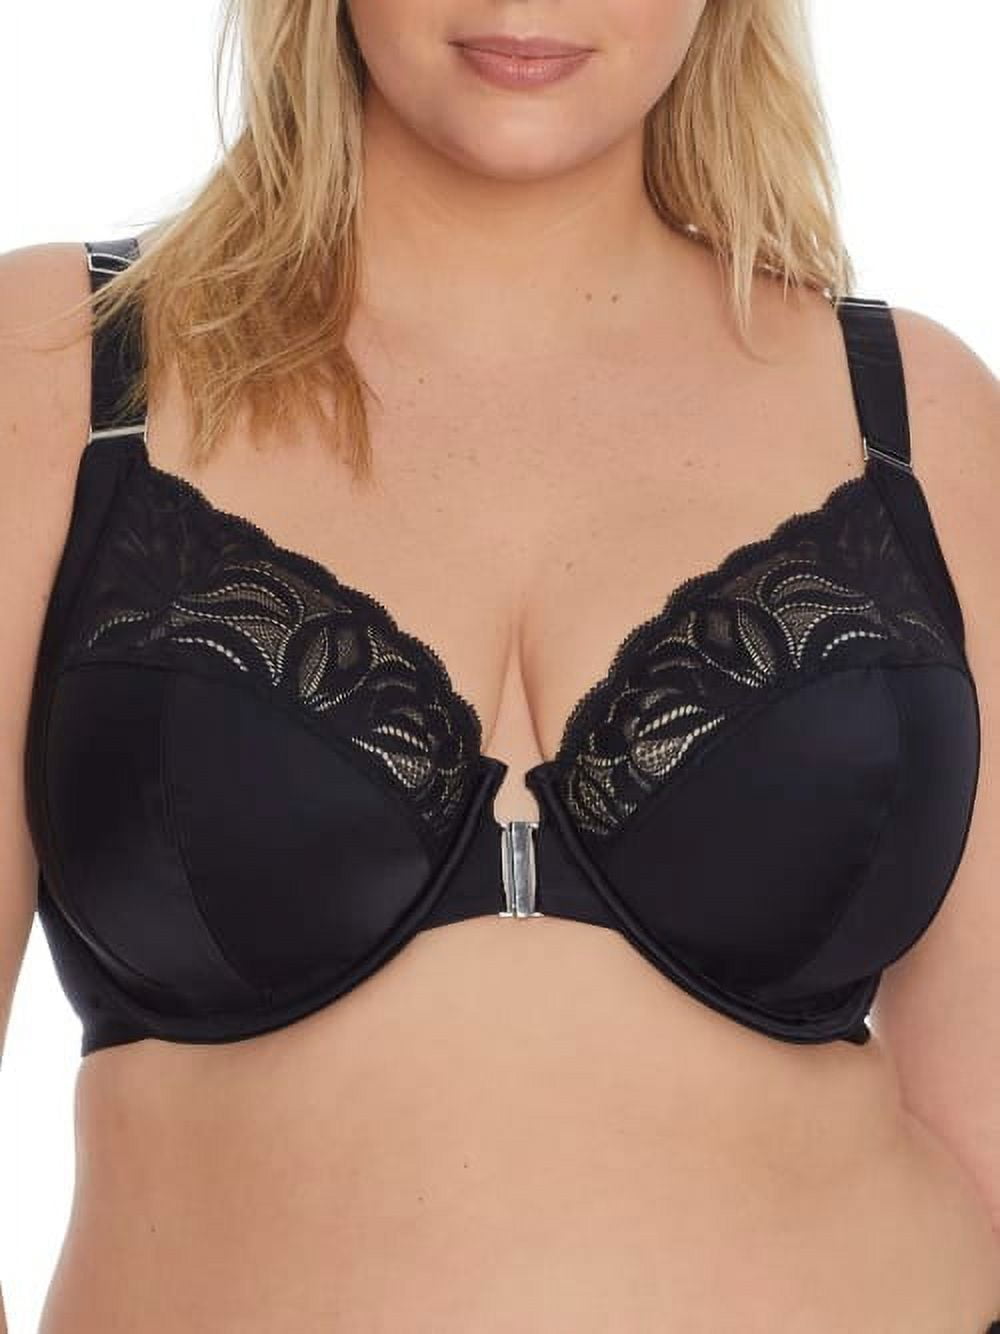 REVEAL Midnight Black The Perfect Support T-Shirt Bra, US 34DDD, UK 34E,  NWOT